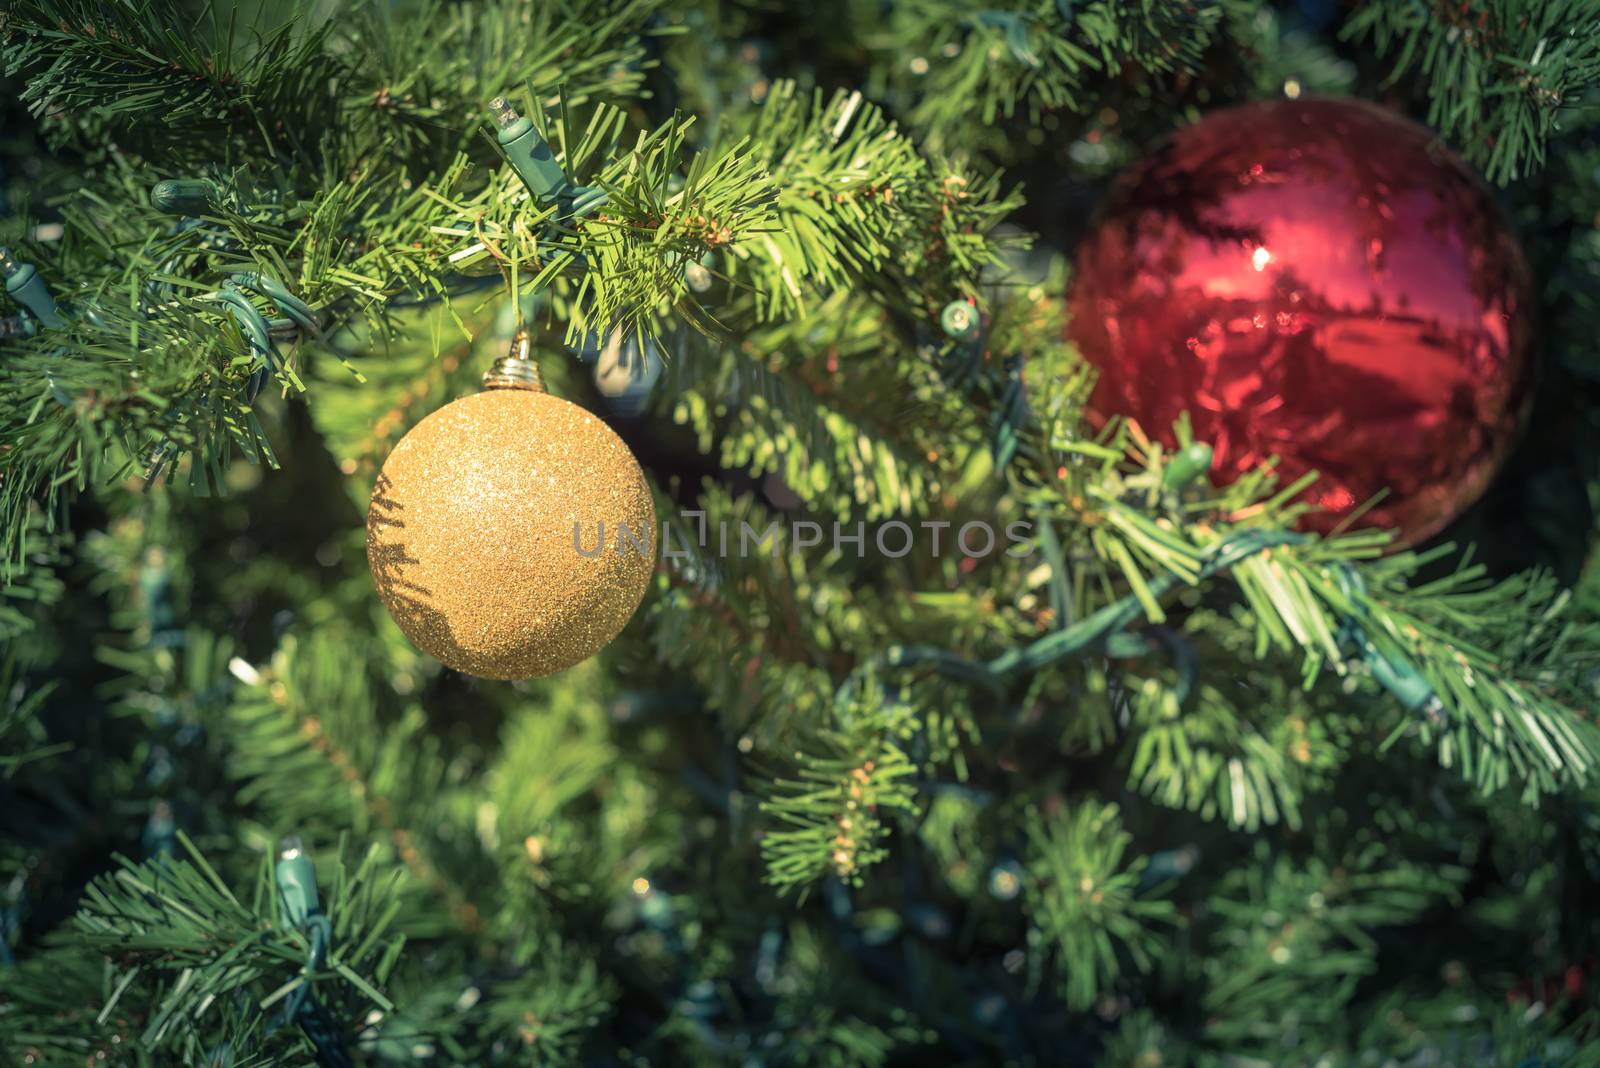 Vintage tone shiny Christmas red ball hanging on pine branches at daytime light. Baubles and branch of spruce tree. Traditional artificial Xmas tree with ball ornament at public park near Dallas, Texas